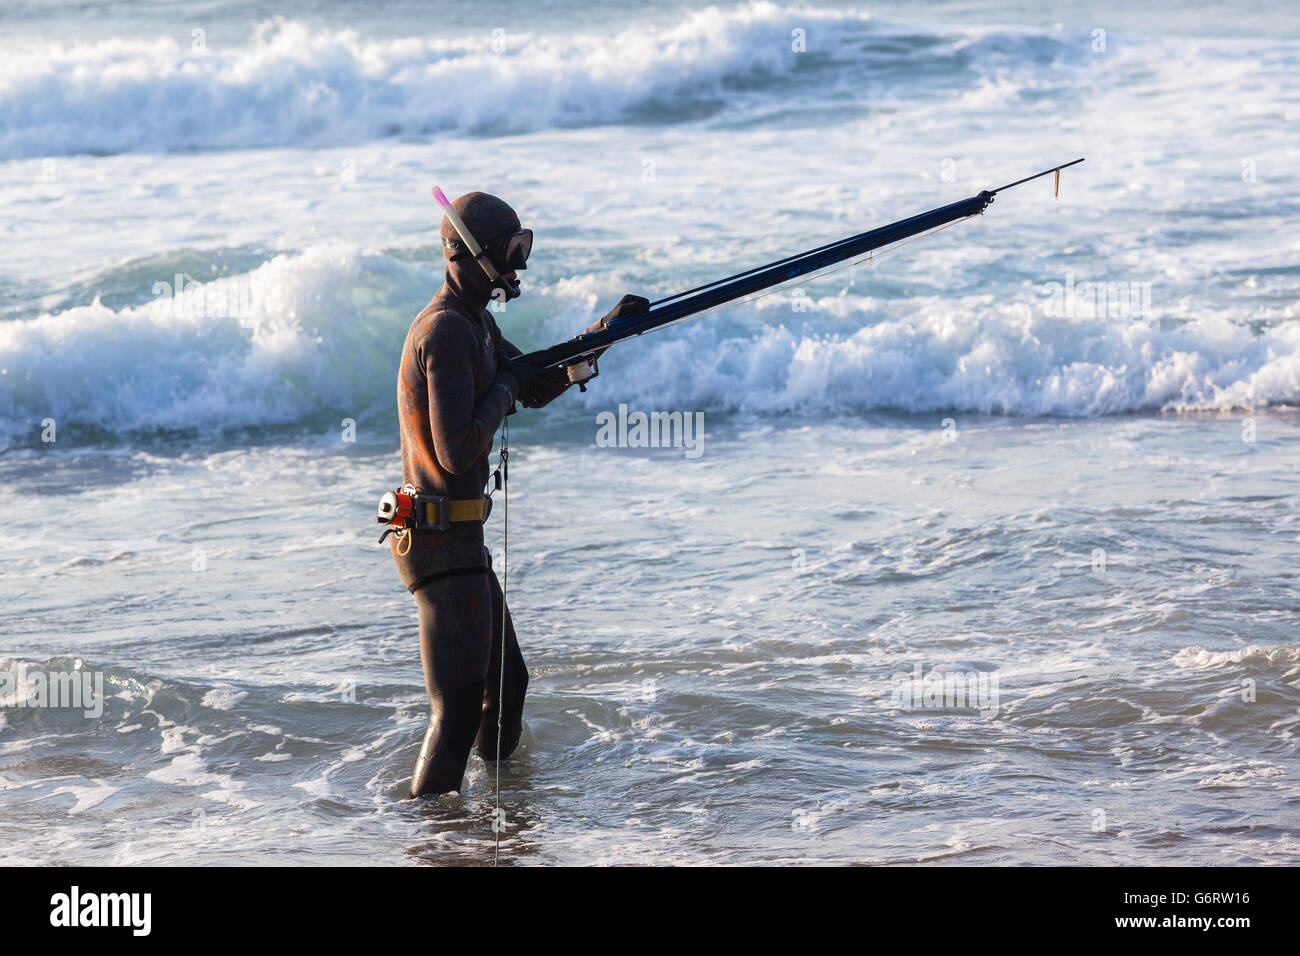 Diver unidentified with spear fishing gun on beach enters ocean waves Stock  Photo - Alamy